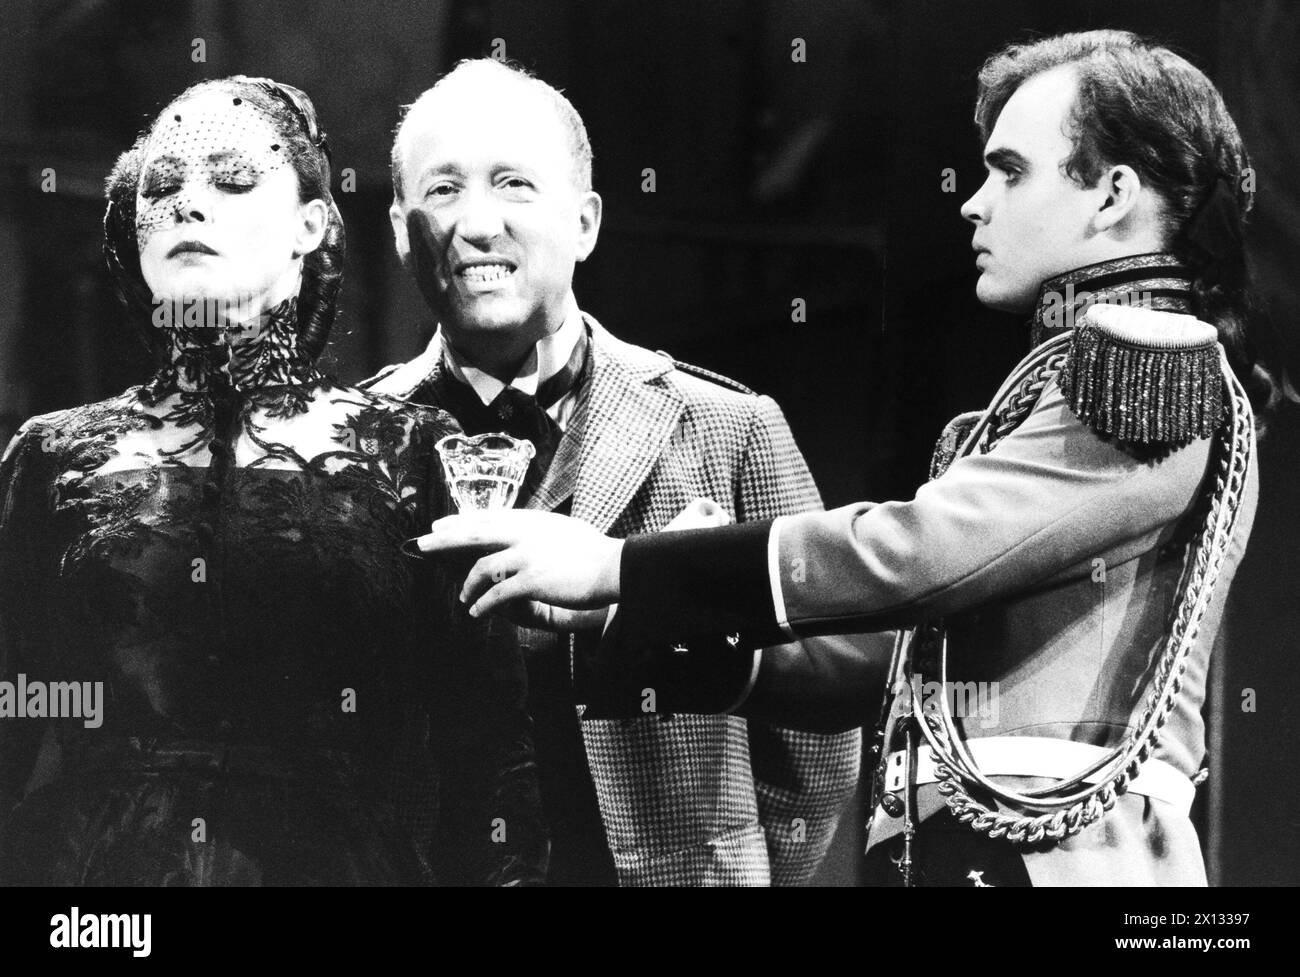 Vienna on October 11th 1988 (f.l.t.r.): Christine Buchegger as 'Duchess of Marlborough', Walter Schmidinger as 'Henry of St. John' and Alexander Wussow as 'Masham' in Eugene Scribe's play 'Le Verre d'Eau' (The glass of water), staged by Aguust Everding in Vienna's Theater in der Josefstadt. - 19881011 PD0008 - Rechteinfo: Rights Managed (RM) Stock Photo